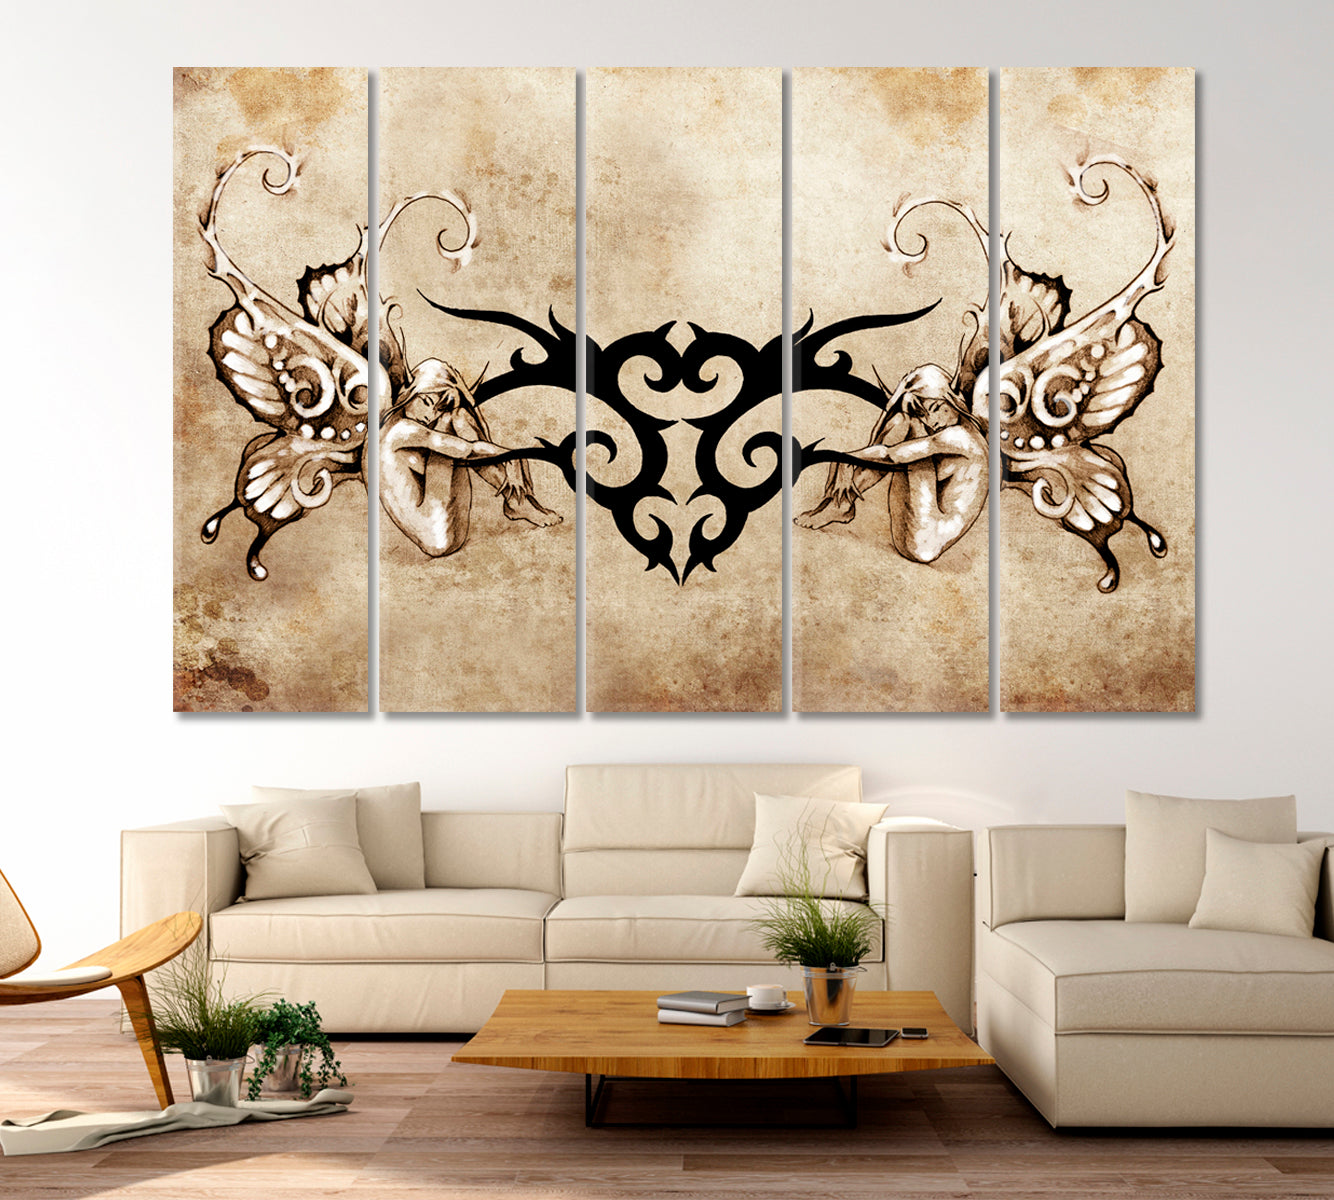 TRIBAL WITH TWO NYMPHS Angels on Vintage Background Vintage Affordable Canvas Print Artesty 5 panels 36" x 24" 